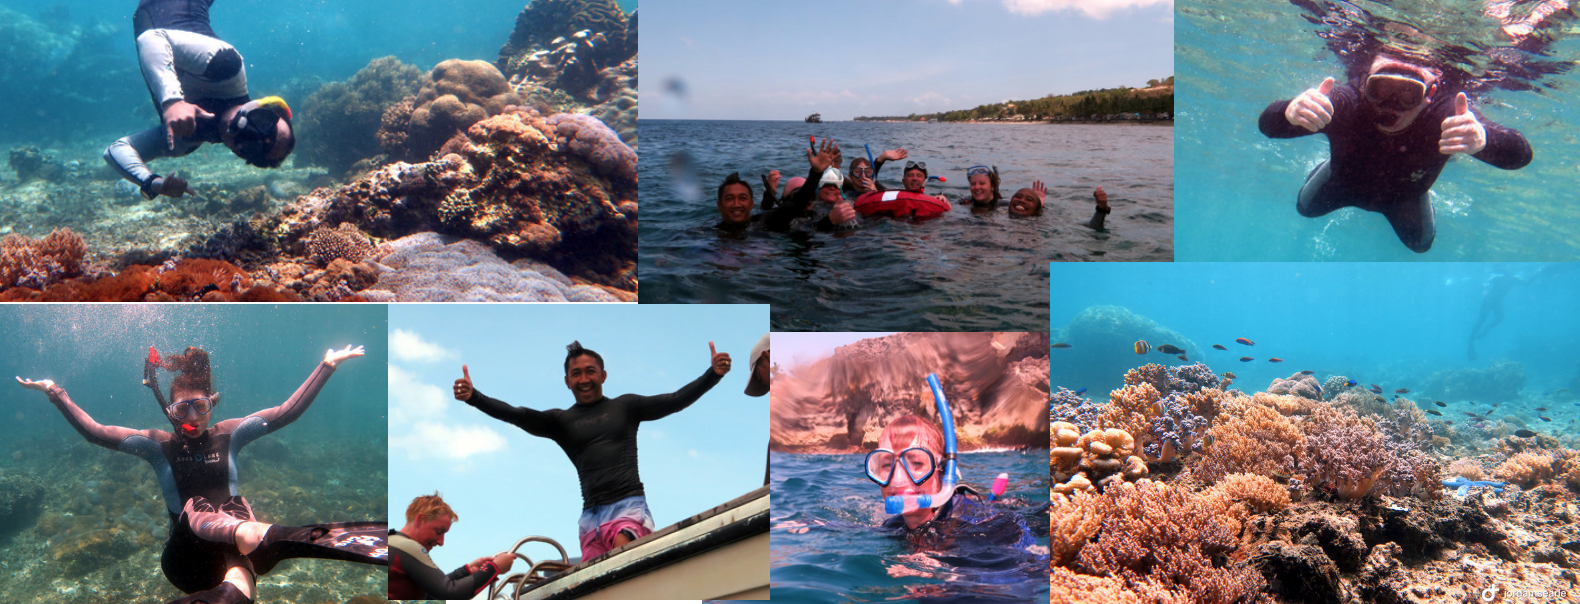 Photos of Snorkelling trip in Amed, Bali